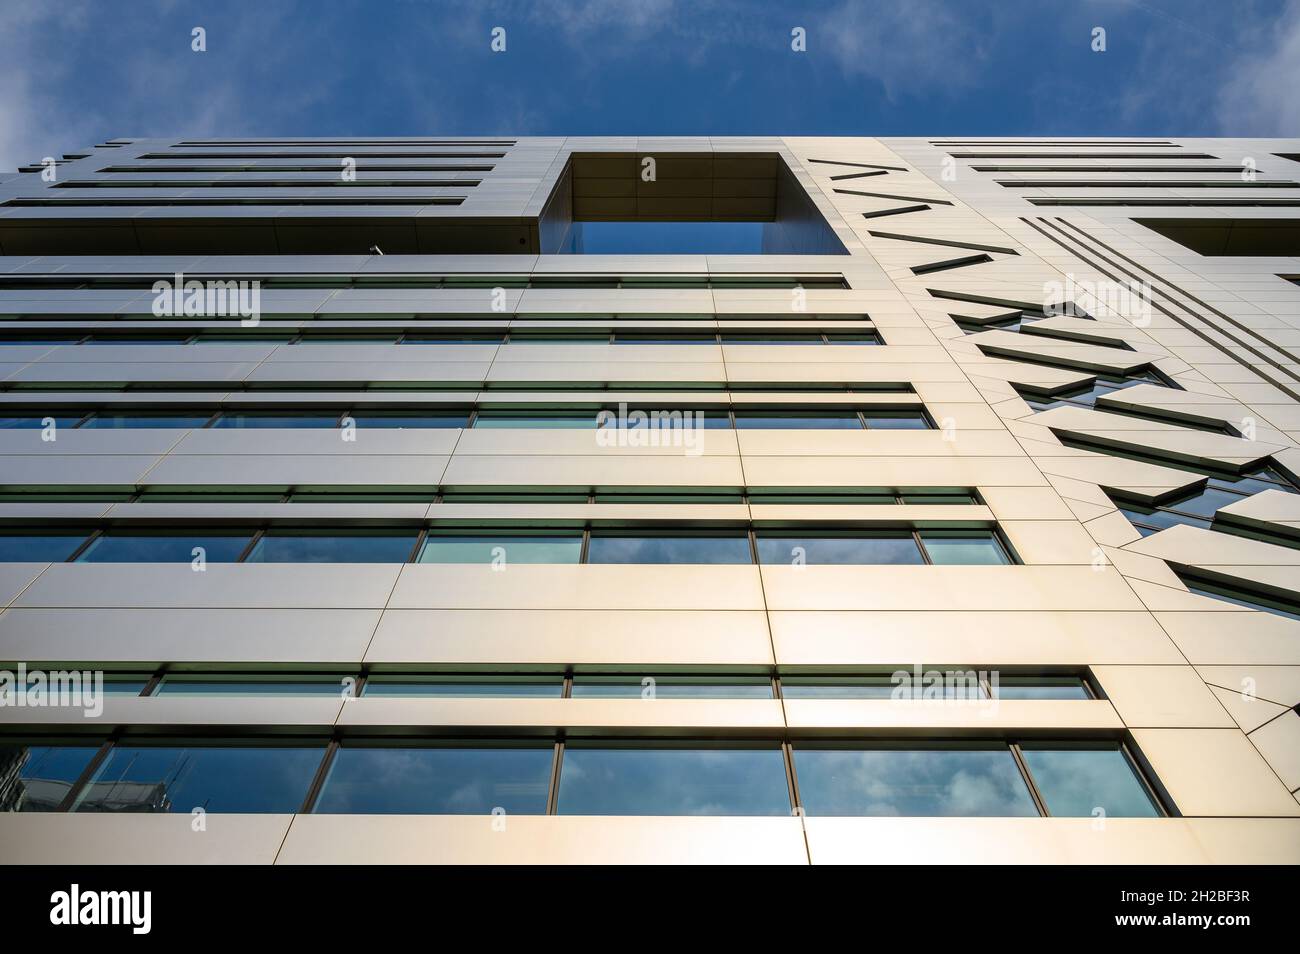 A skyward lview up the exterior front facade of the USB AG bank office block at 5 Broadgate, London, England. Stock Photo